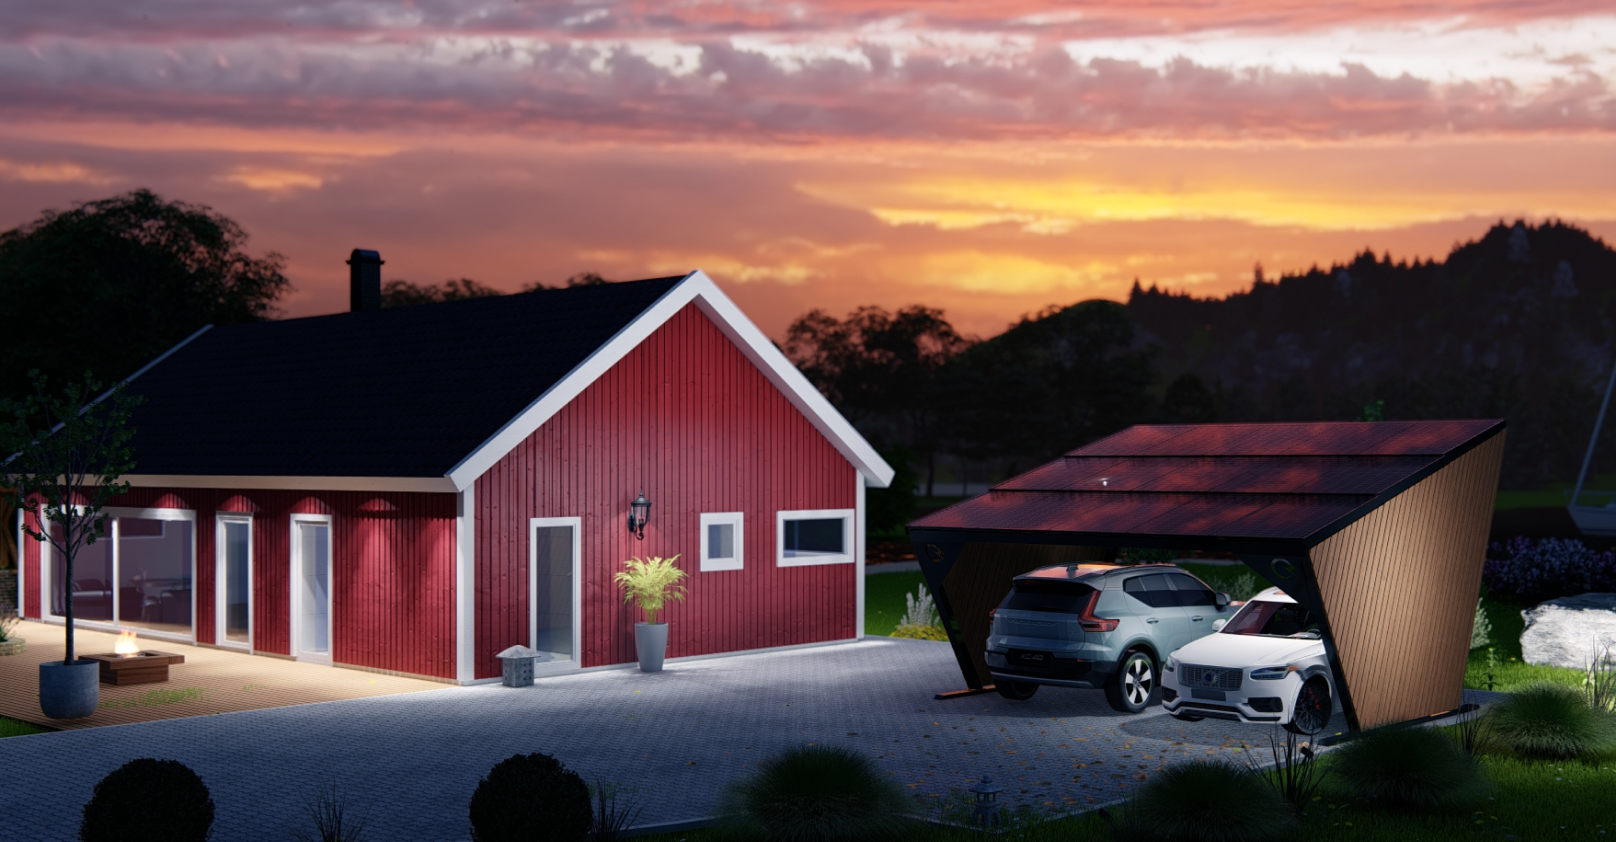 a house and solar carport with 2 cars parked under in the evening sun